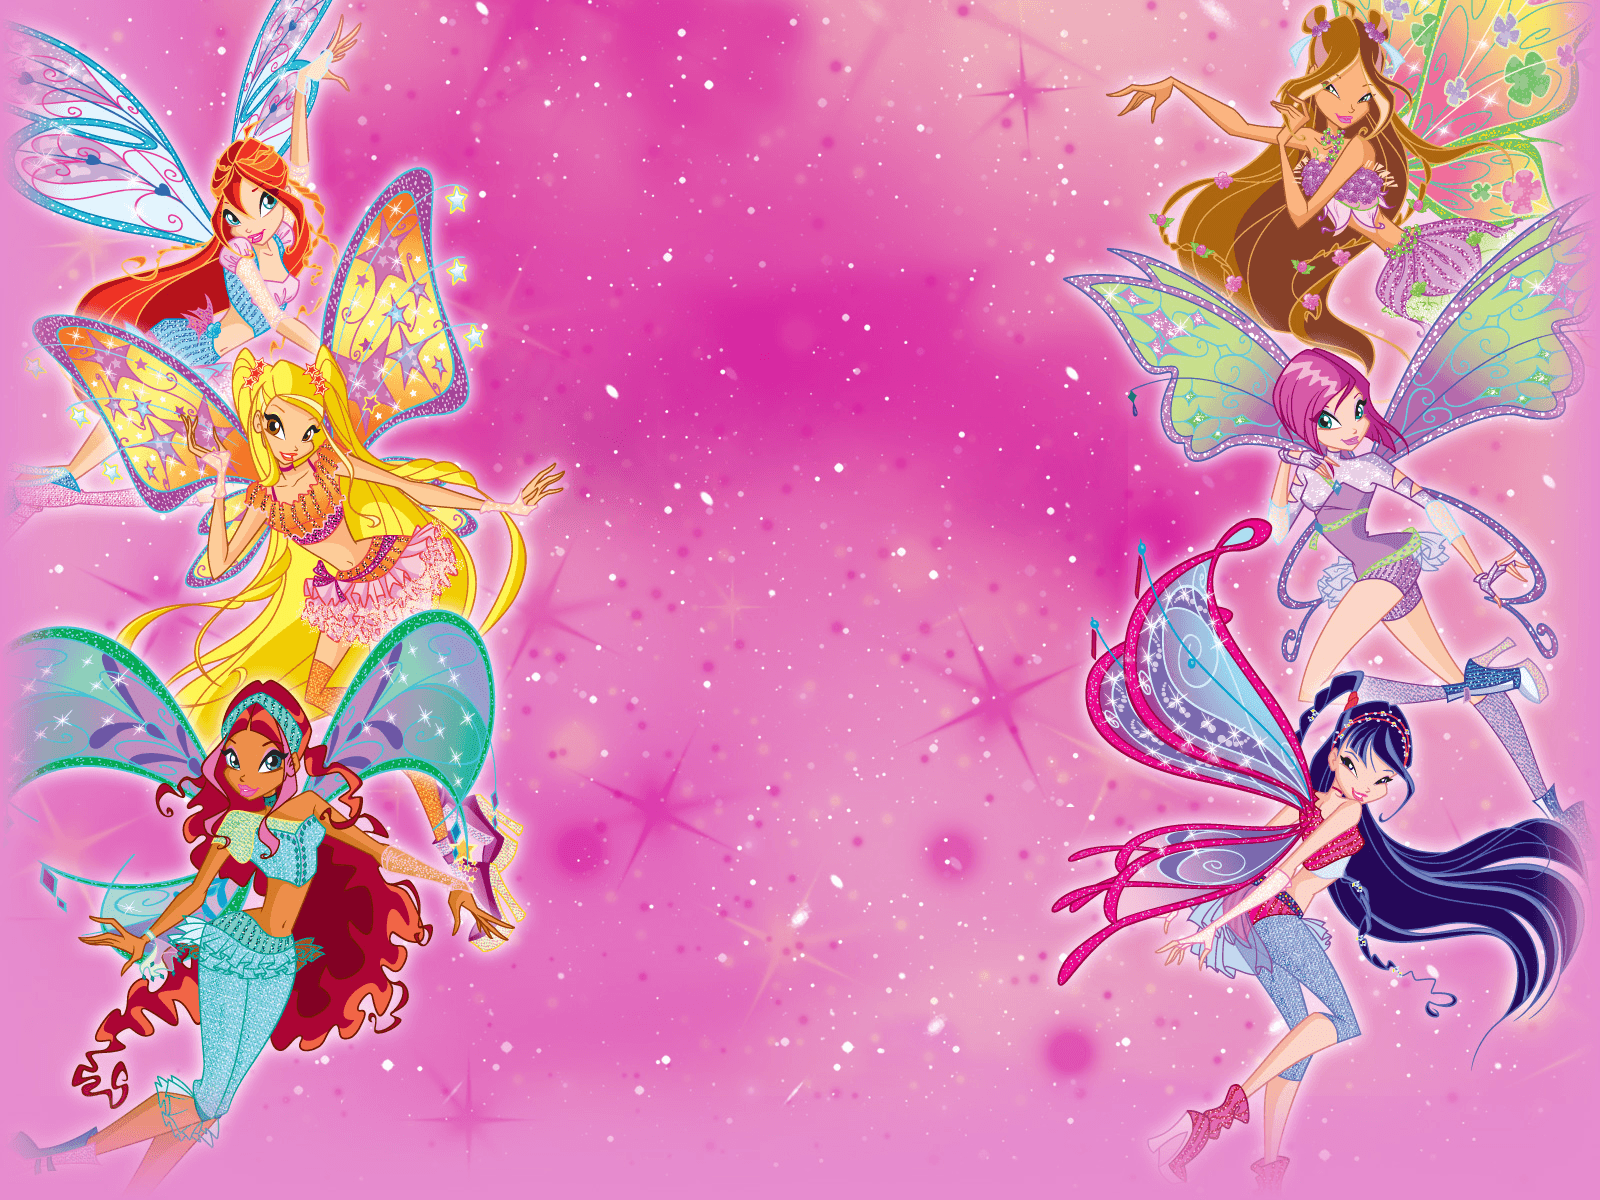 Wallpaper Of Winx Club Believix For Fans Of The Winx - Winx Club Birthday Invitation Card , HD Wallpaper & Backgrounds